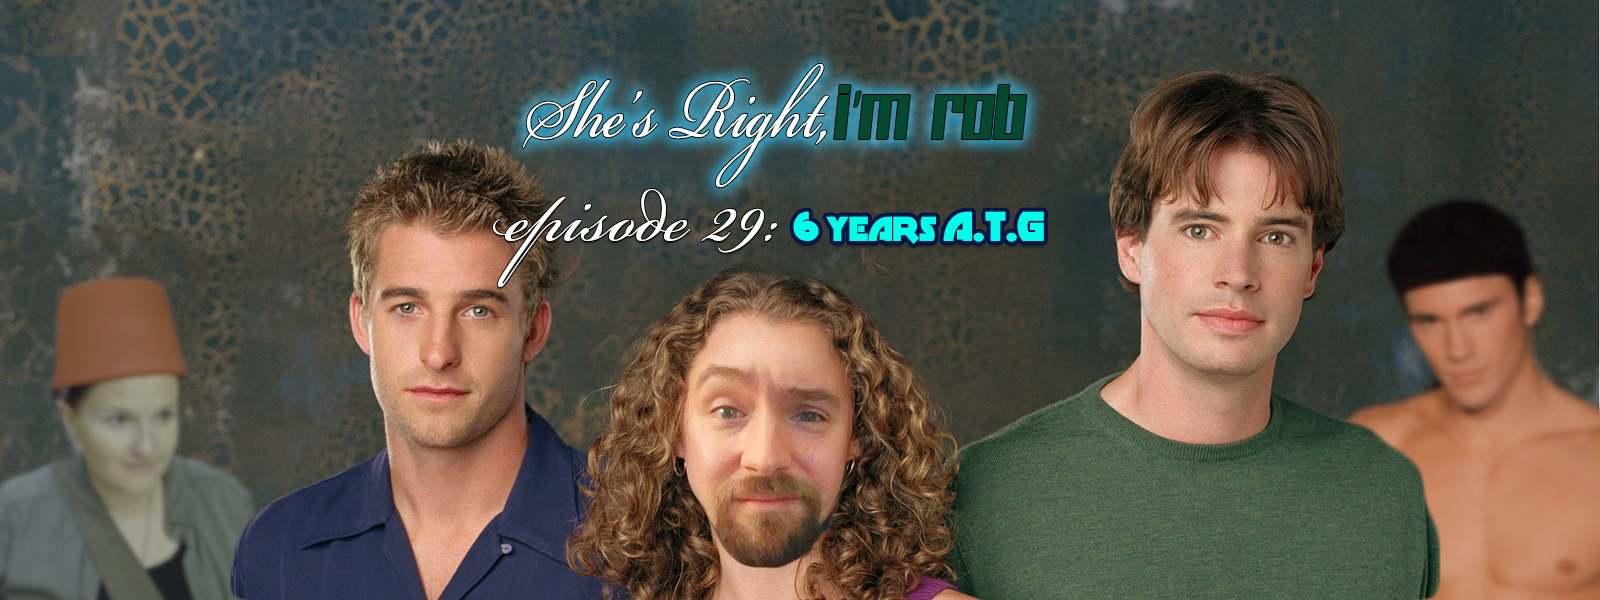 She’s Right, I’m Rob Episode 29: 6 Years A.T.G.